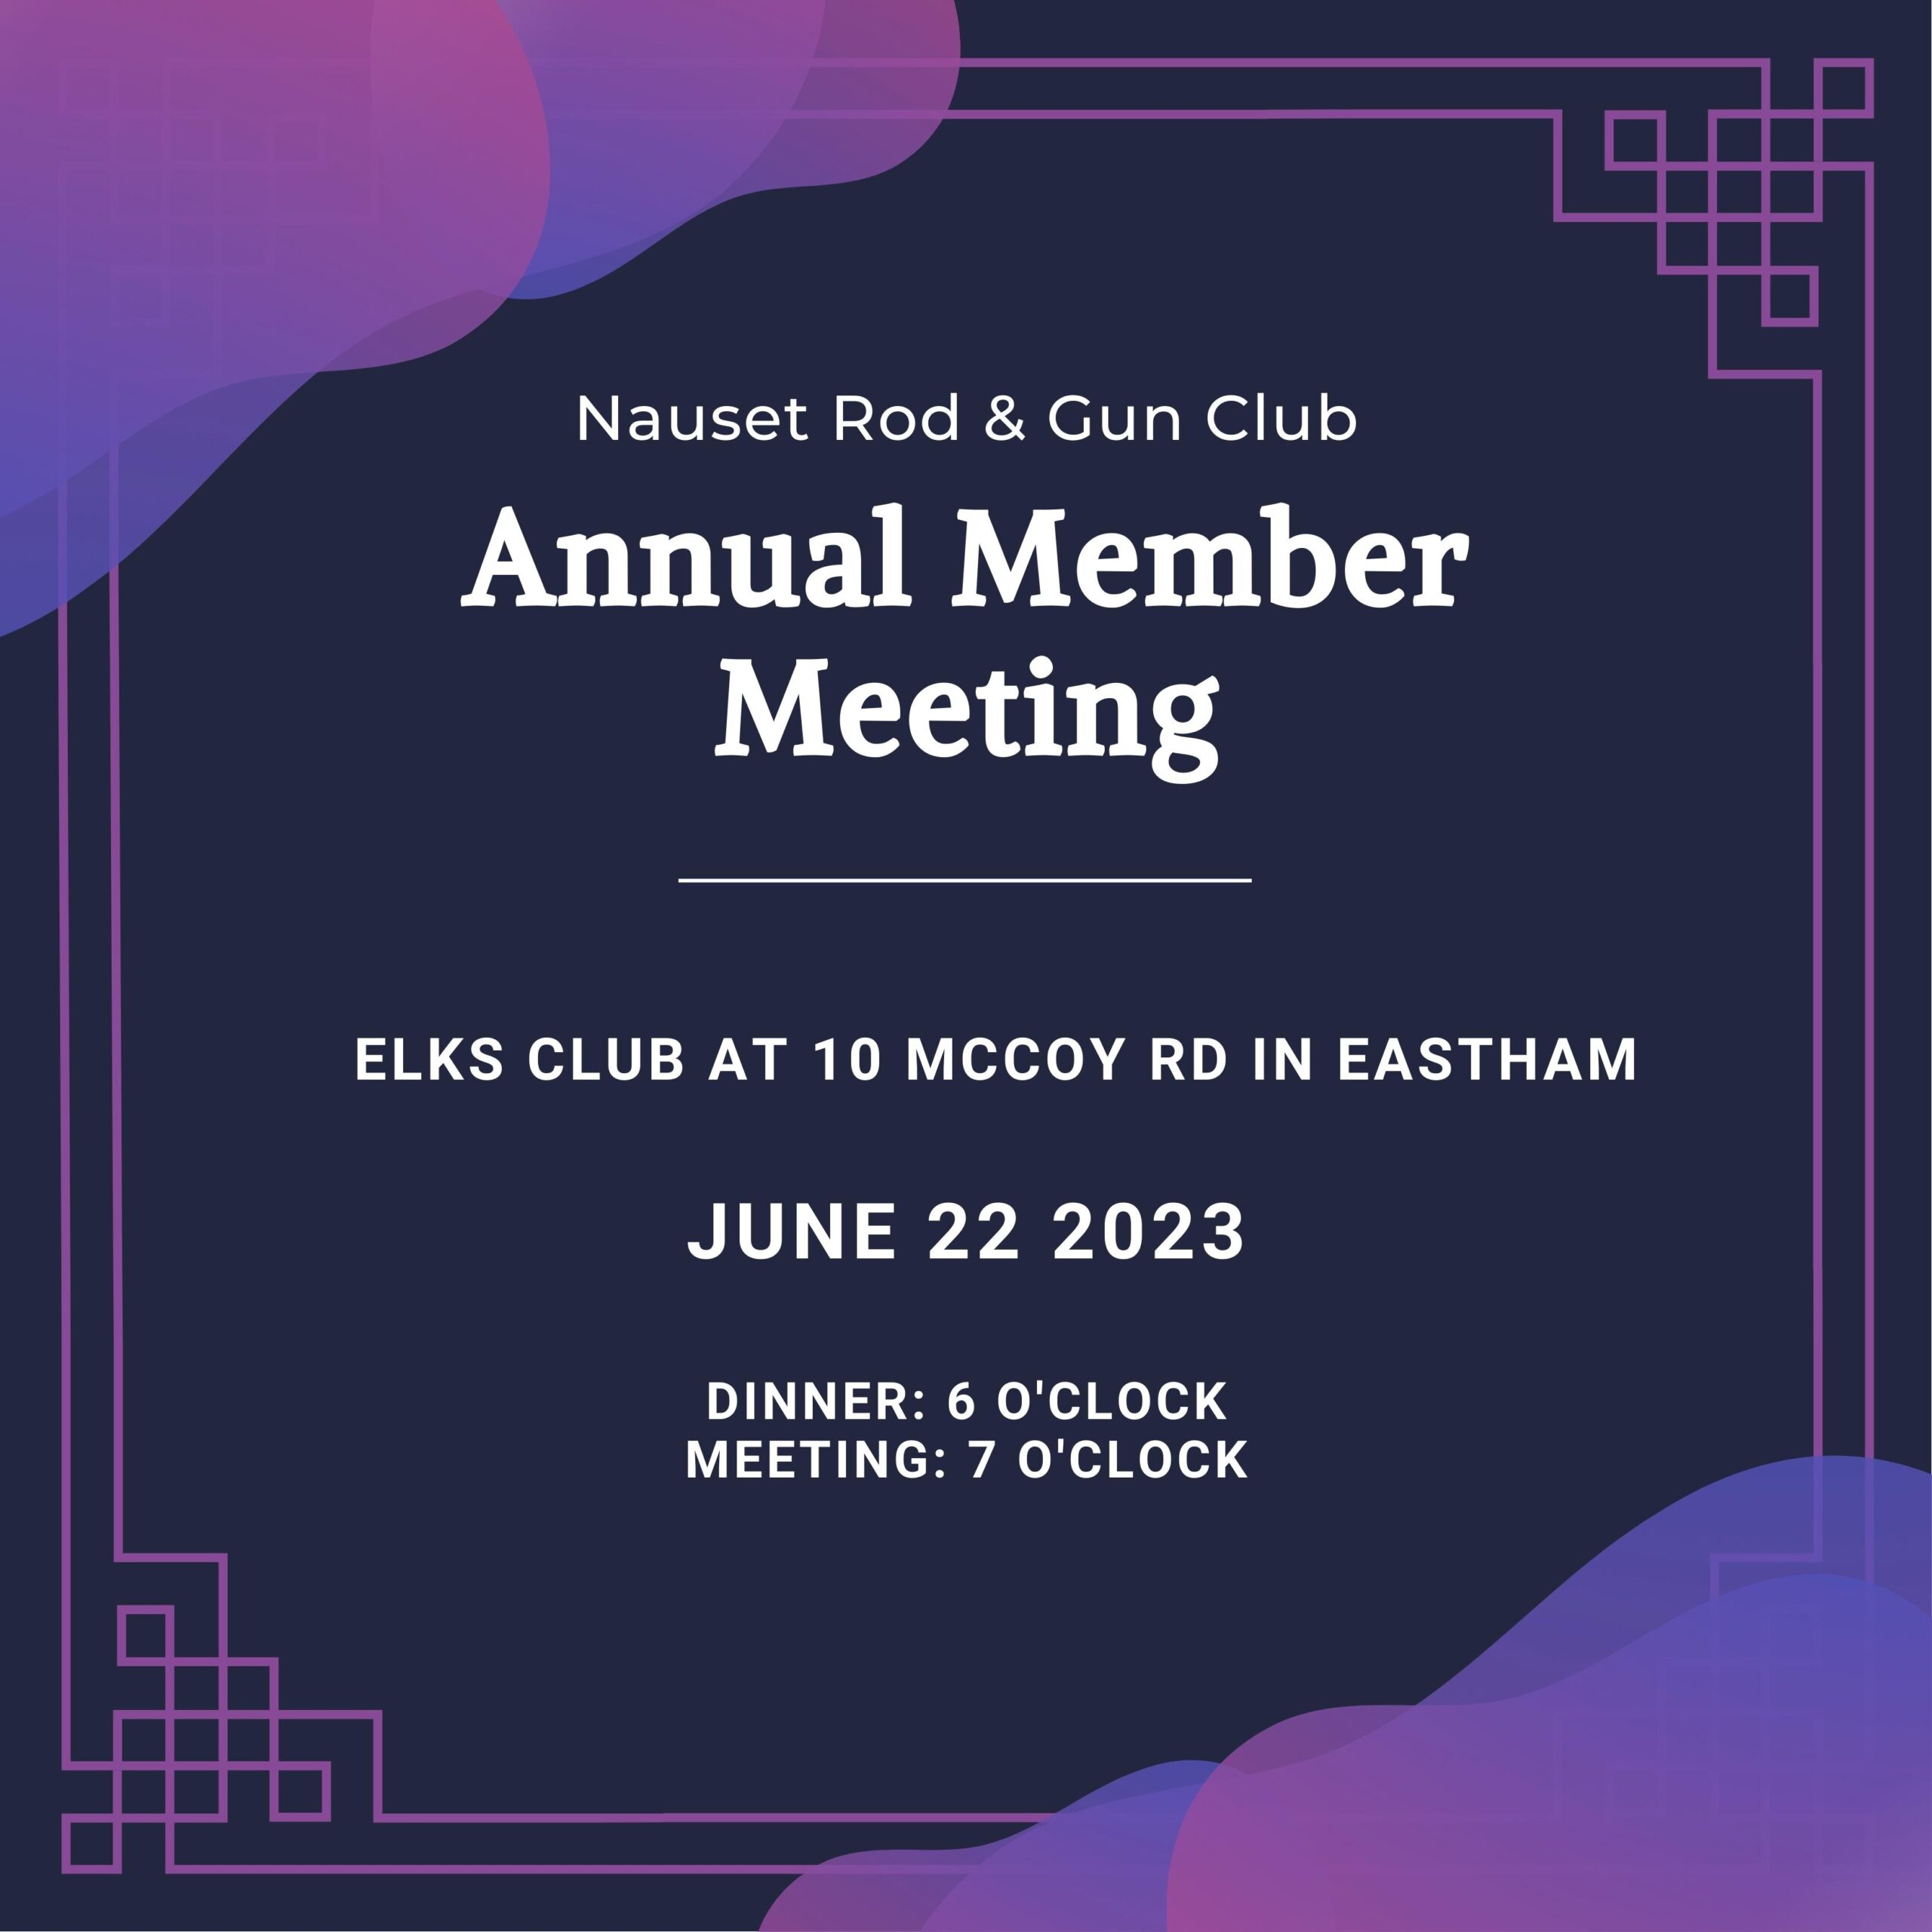 NRGC 2023 Annual Meeting and Cookout June 22